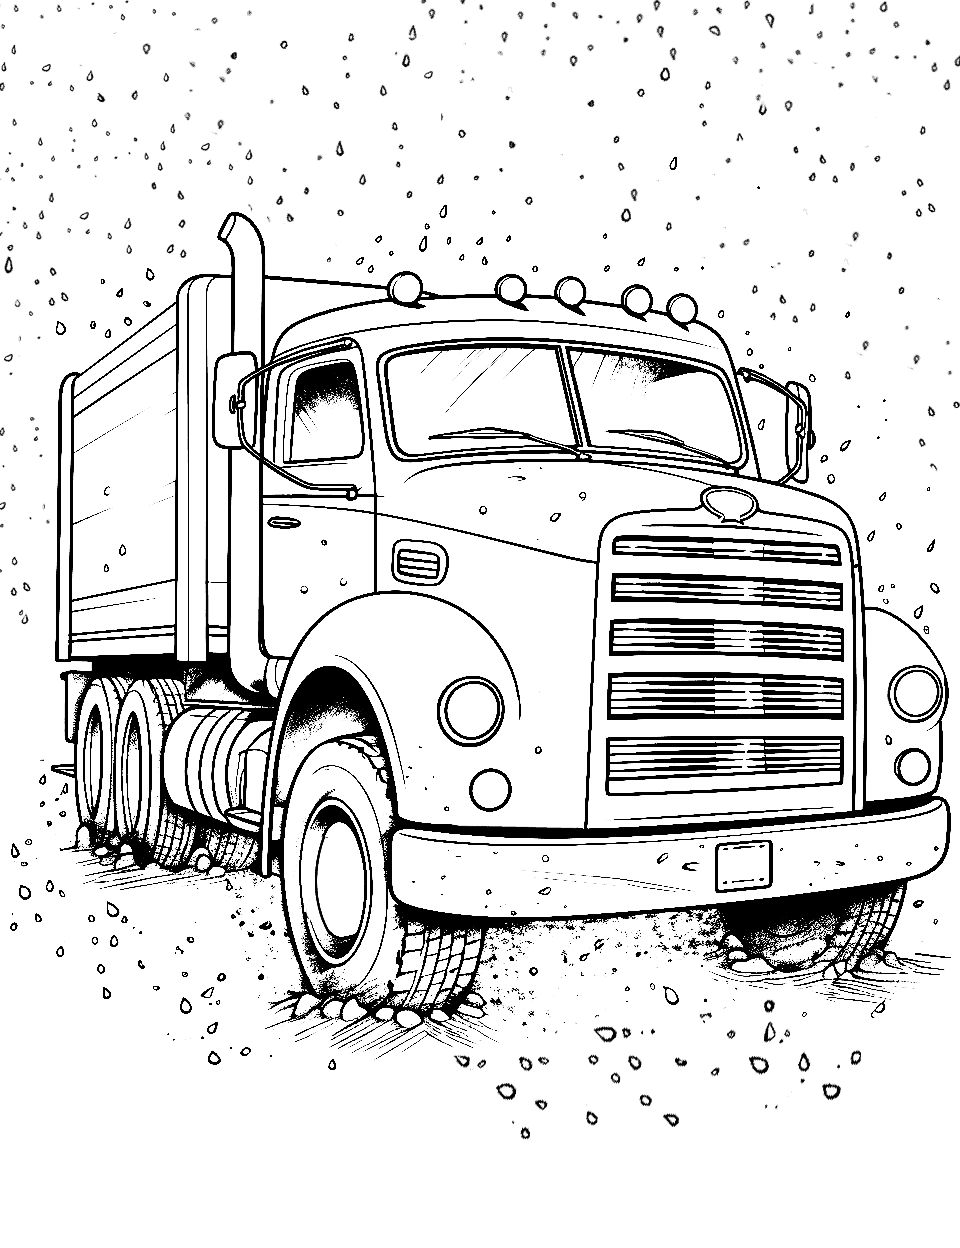 Rainy Day Drive Coloring Page - A truck with raindrops falling around driving through a puddle.